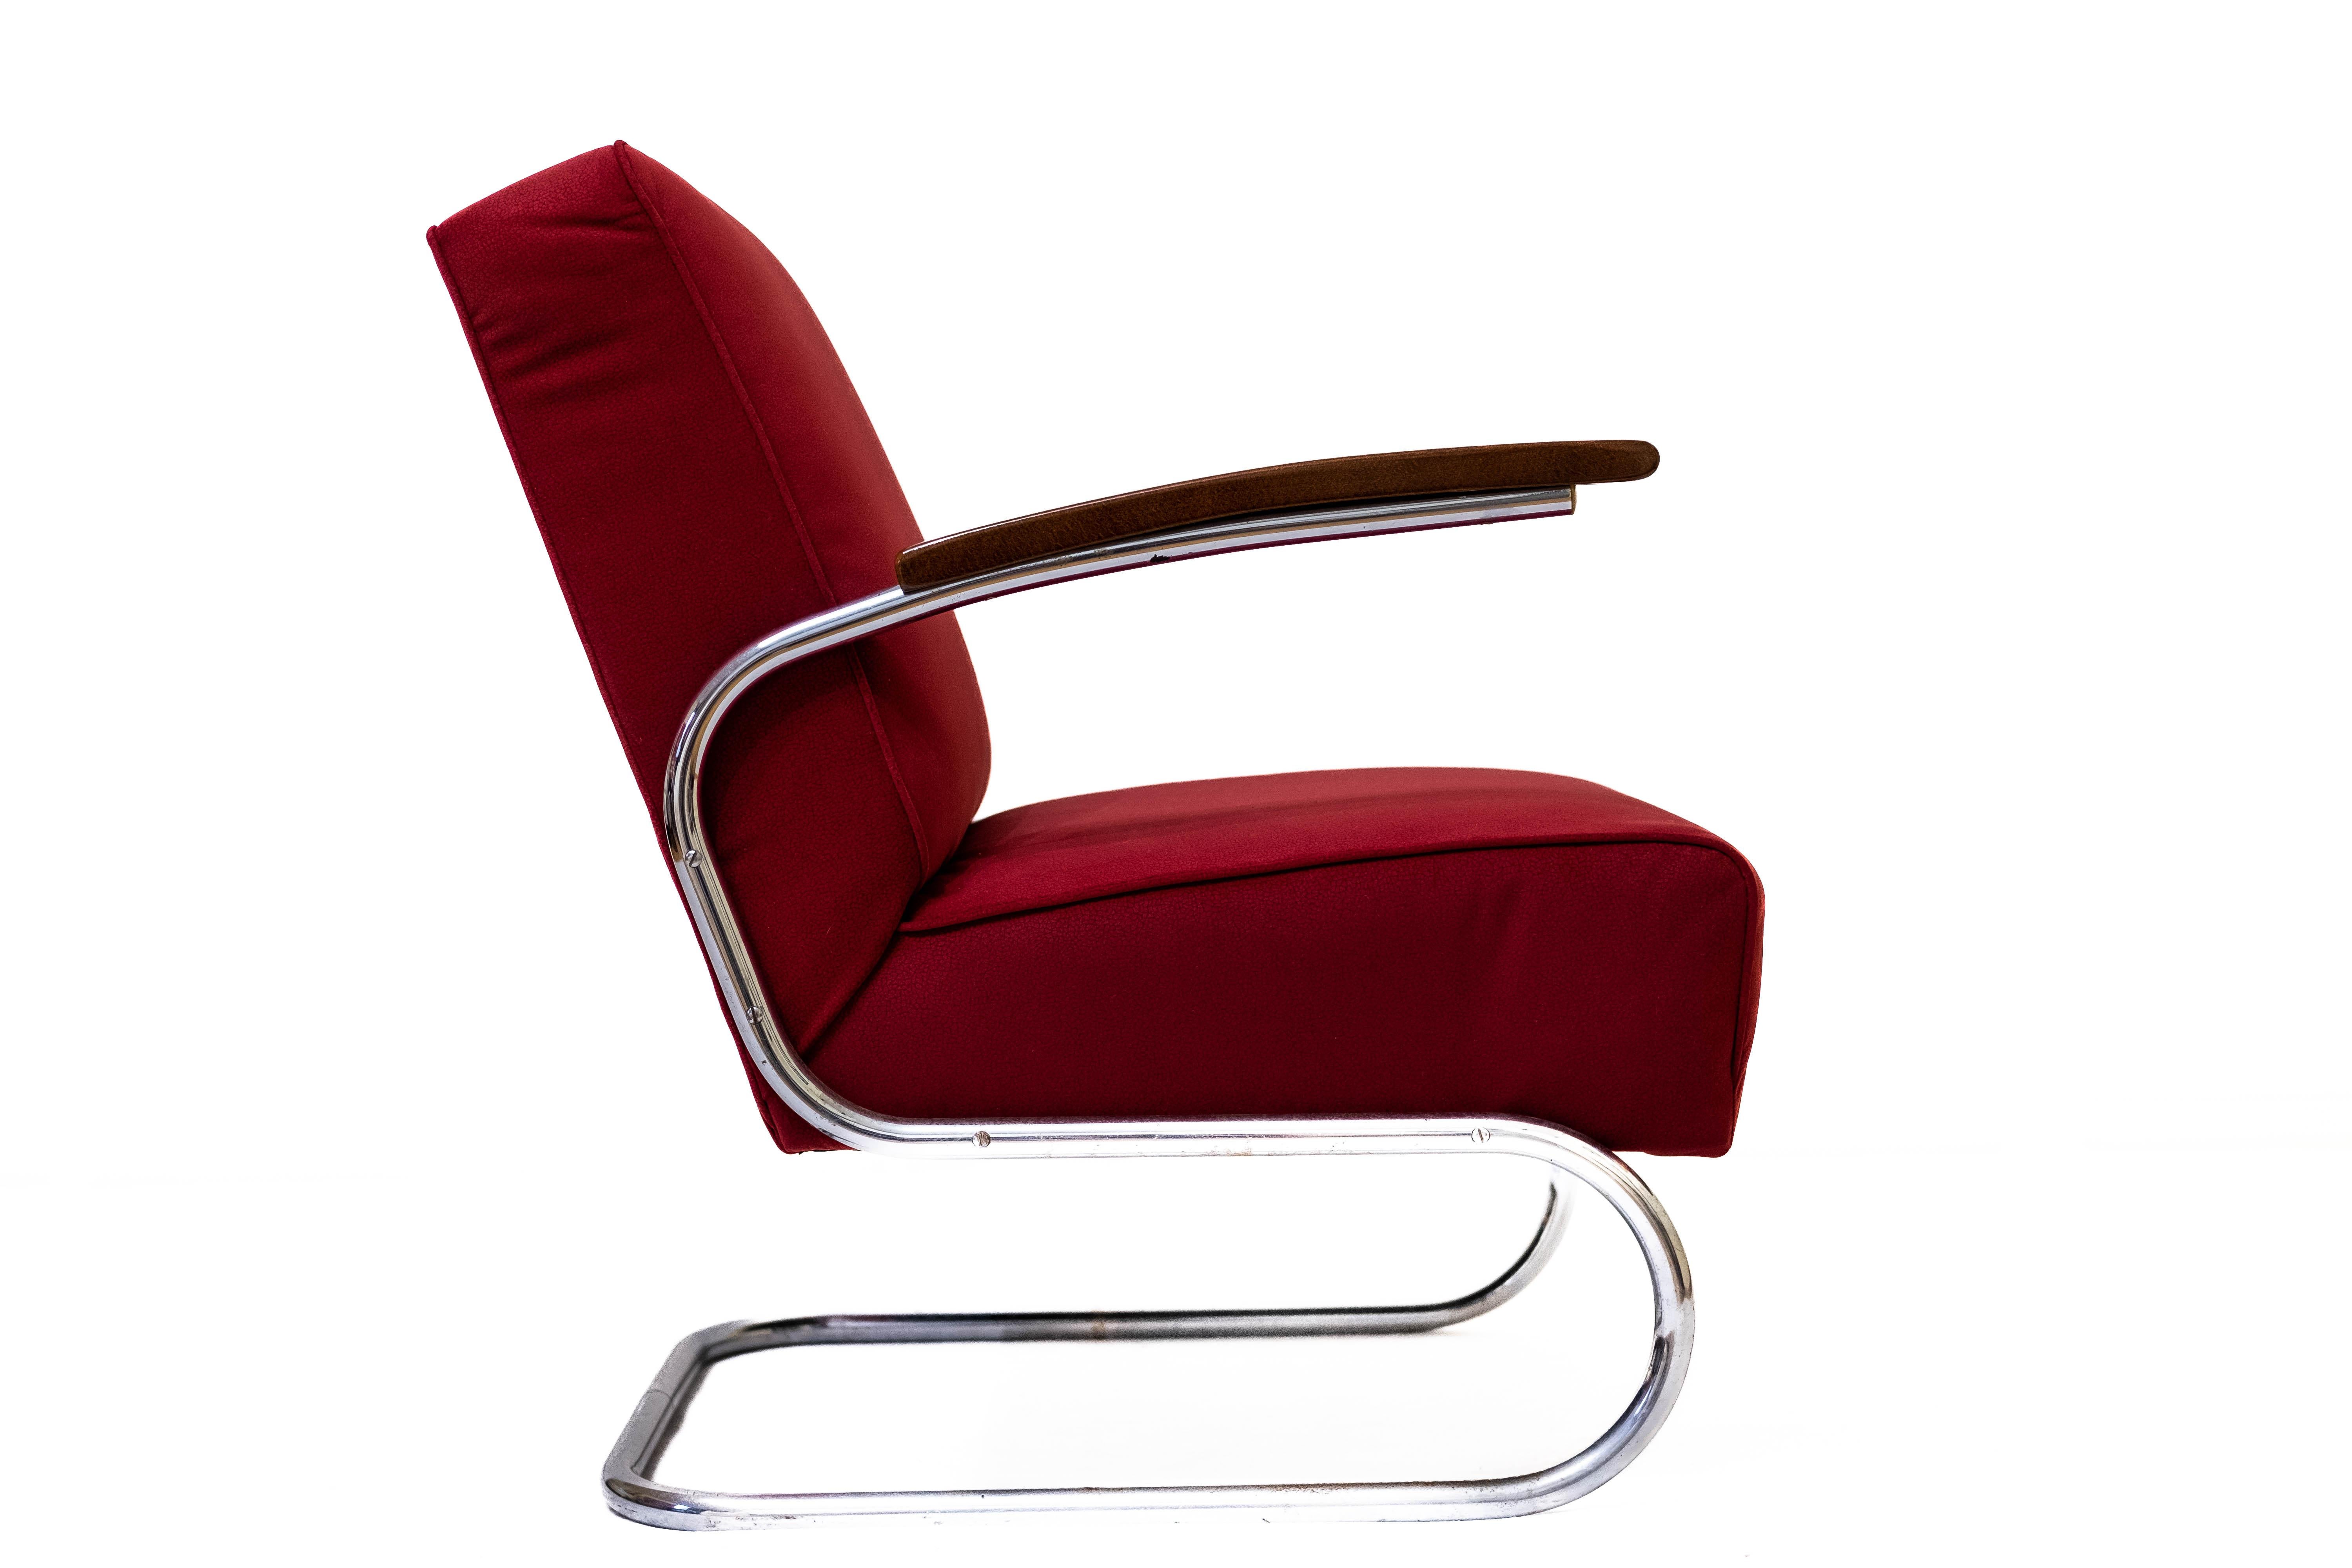 Bauhaus Steelpipe-Fauteuil by Walter Knoll for Tonet Brothers (Vienna, 1935) For Sale 5